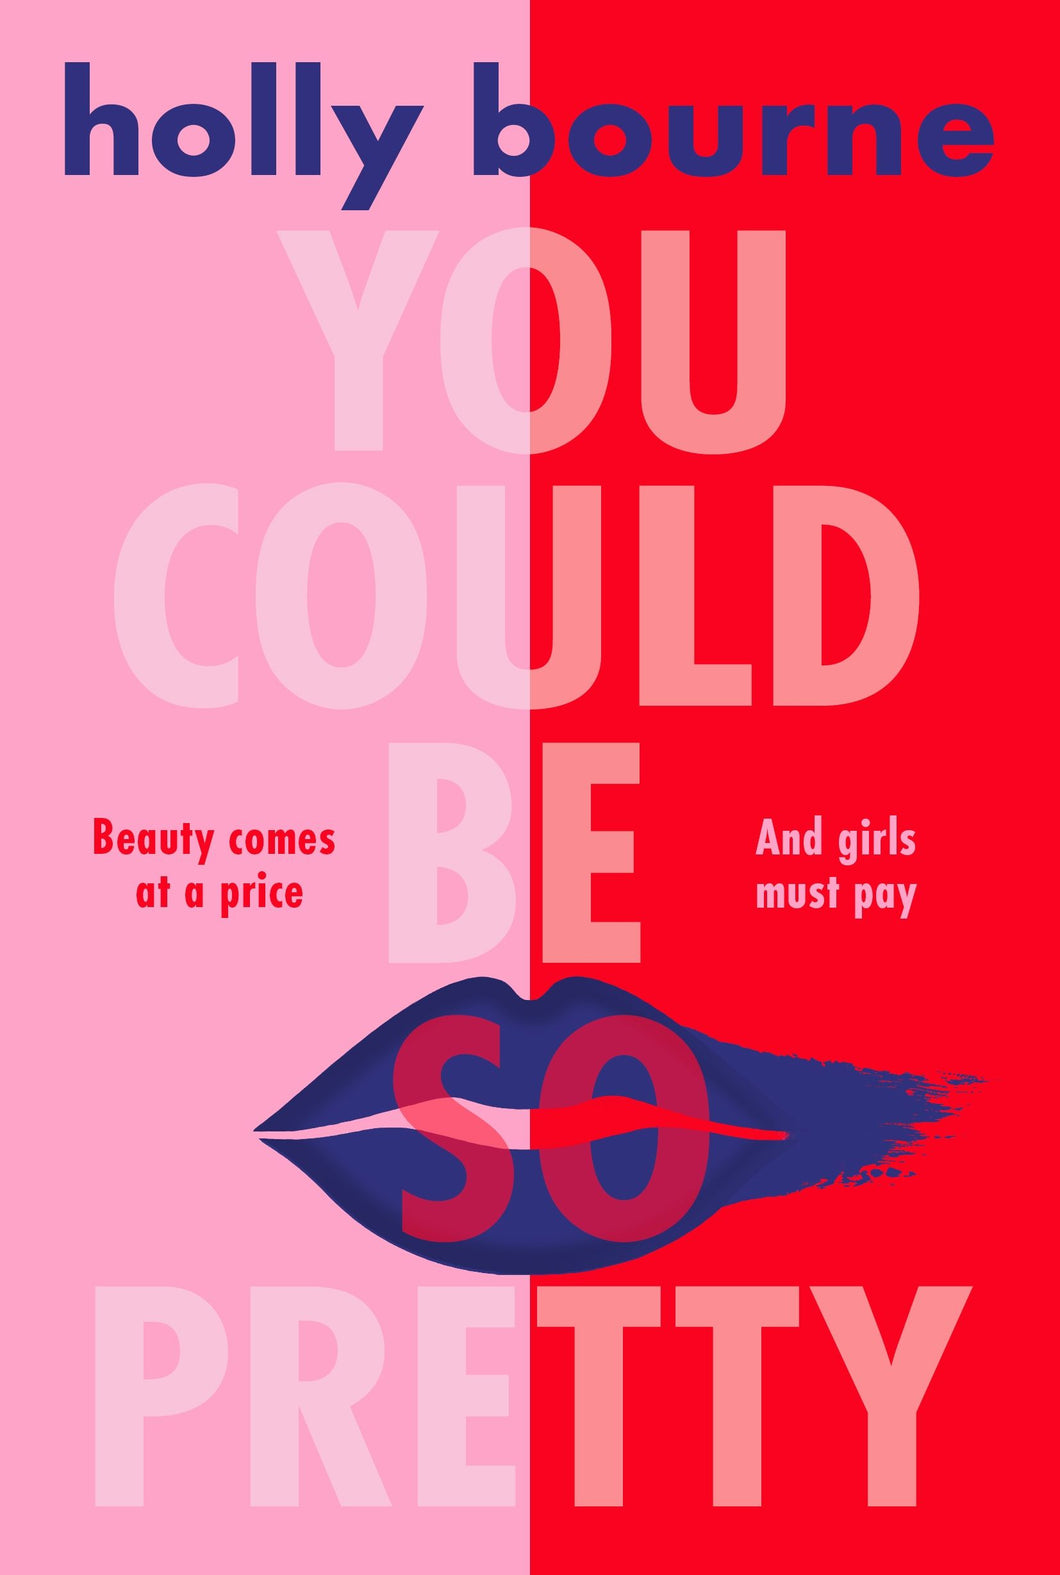 You Could Be So Pretty by Holly Bourne